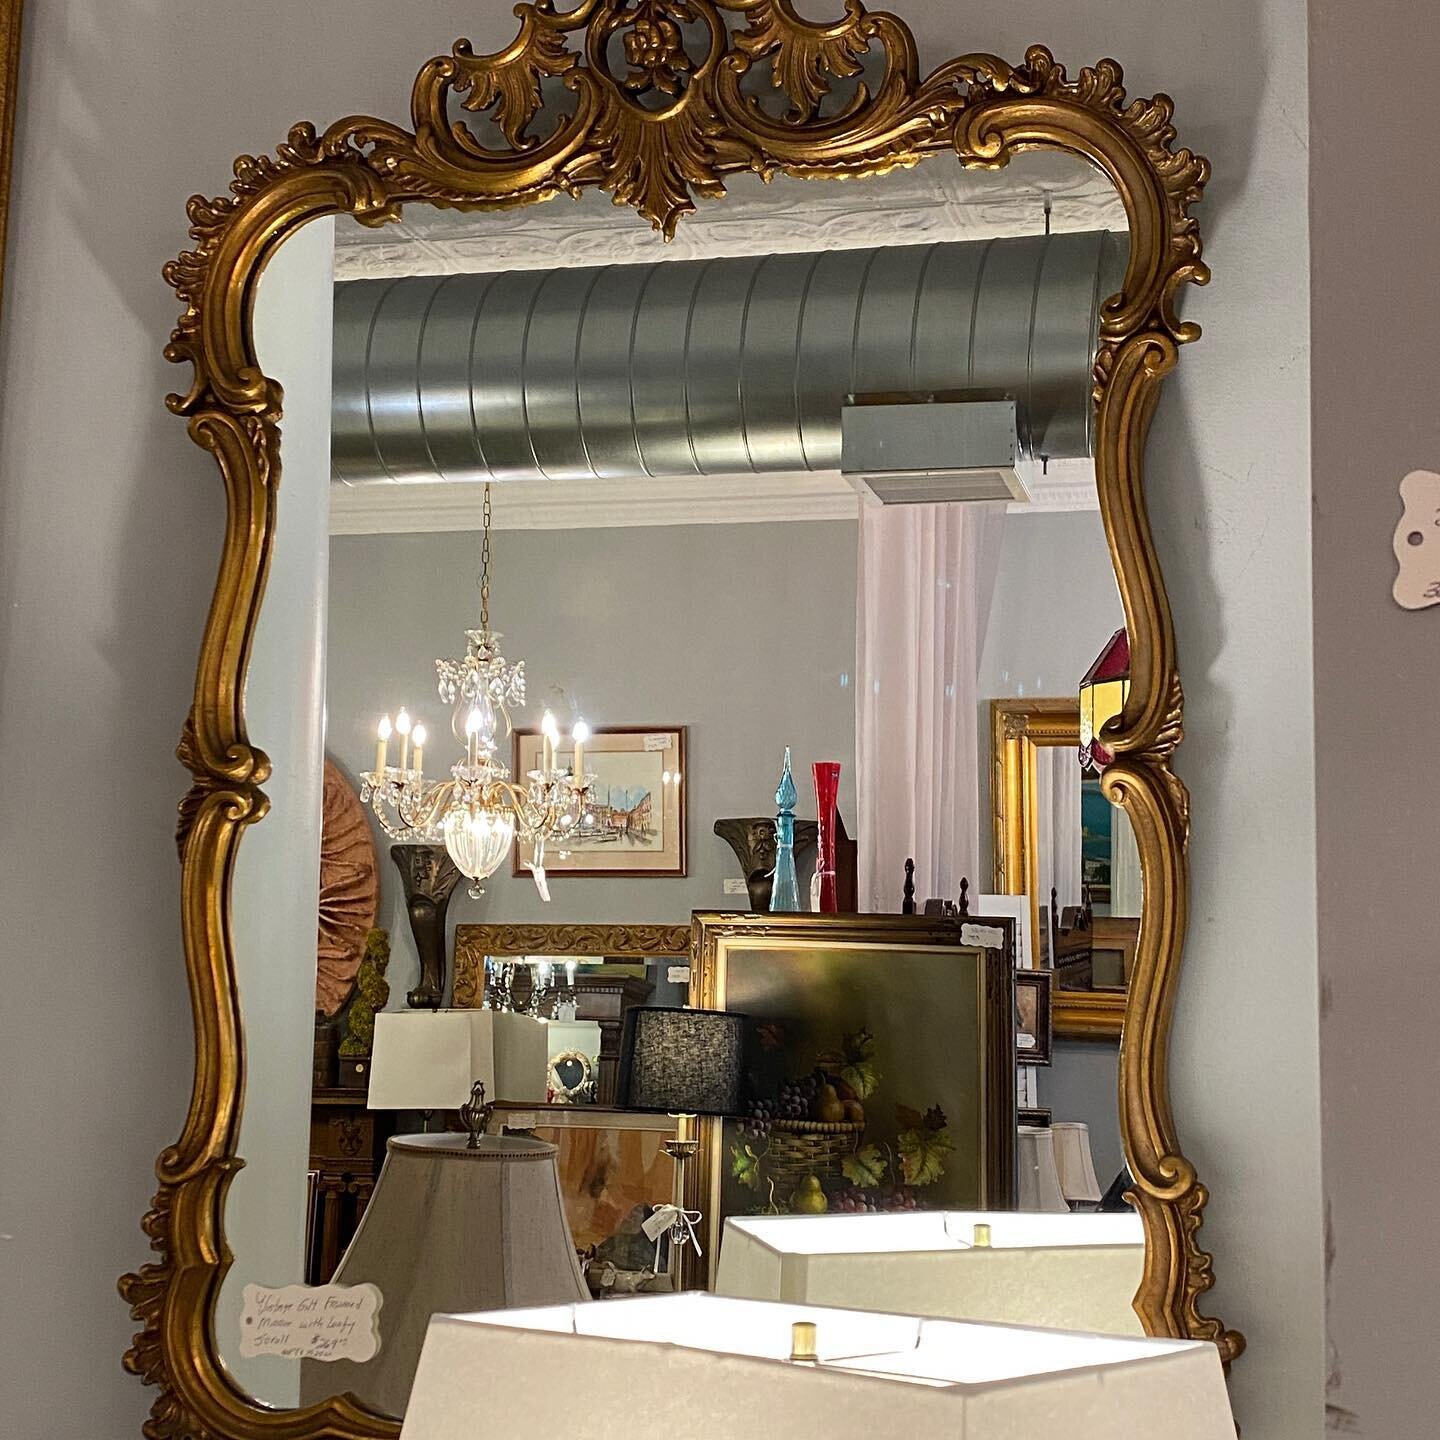 Nothing expands a space more than mirrors which can instantly refresh your decor and add dimension to the room.